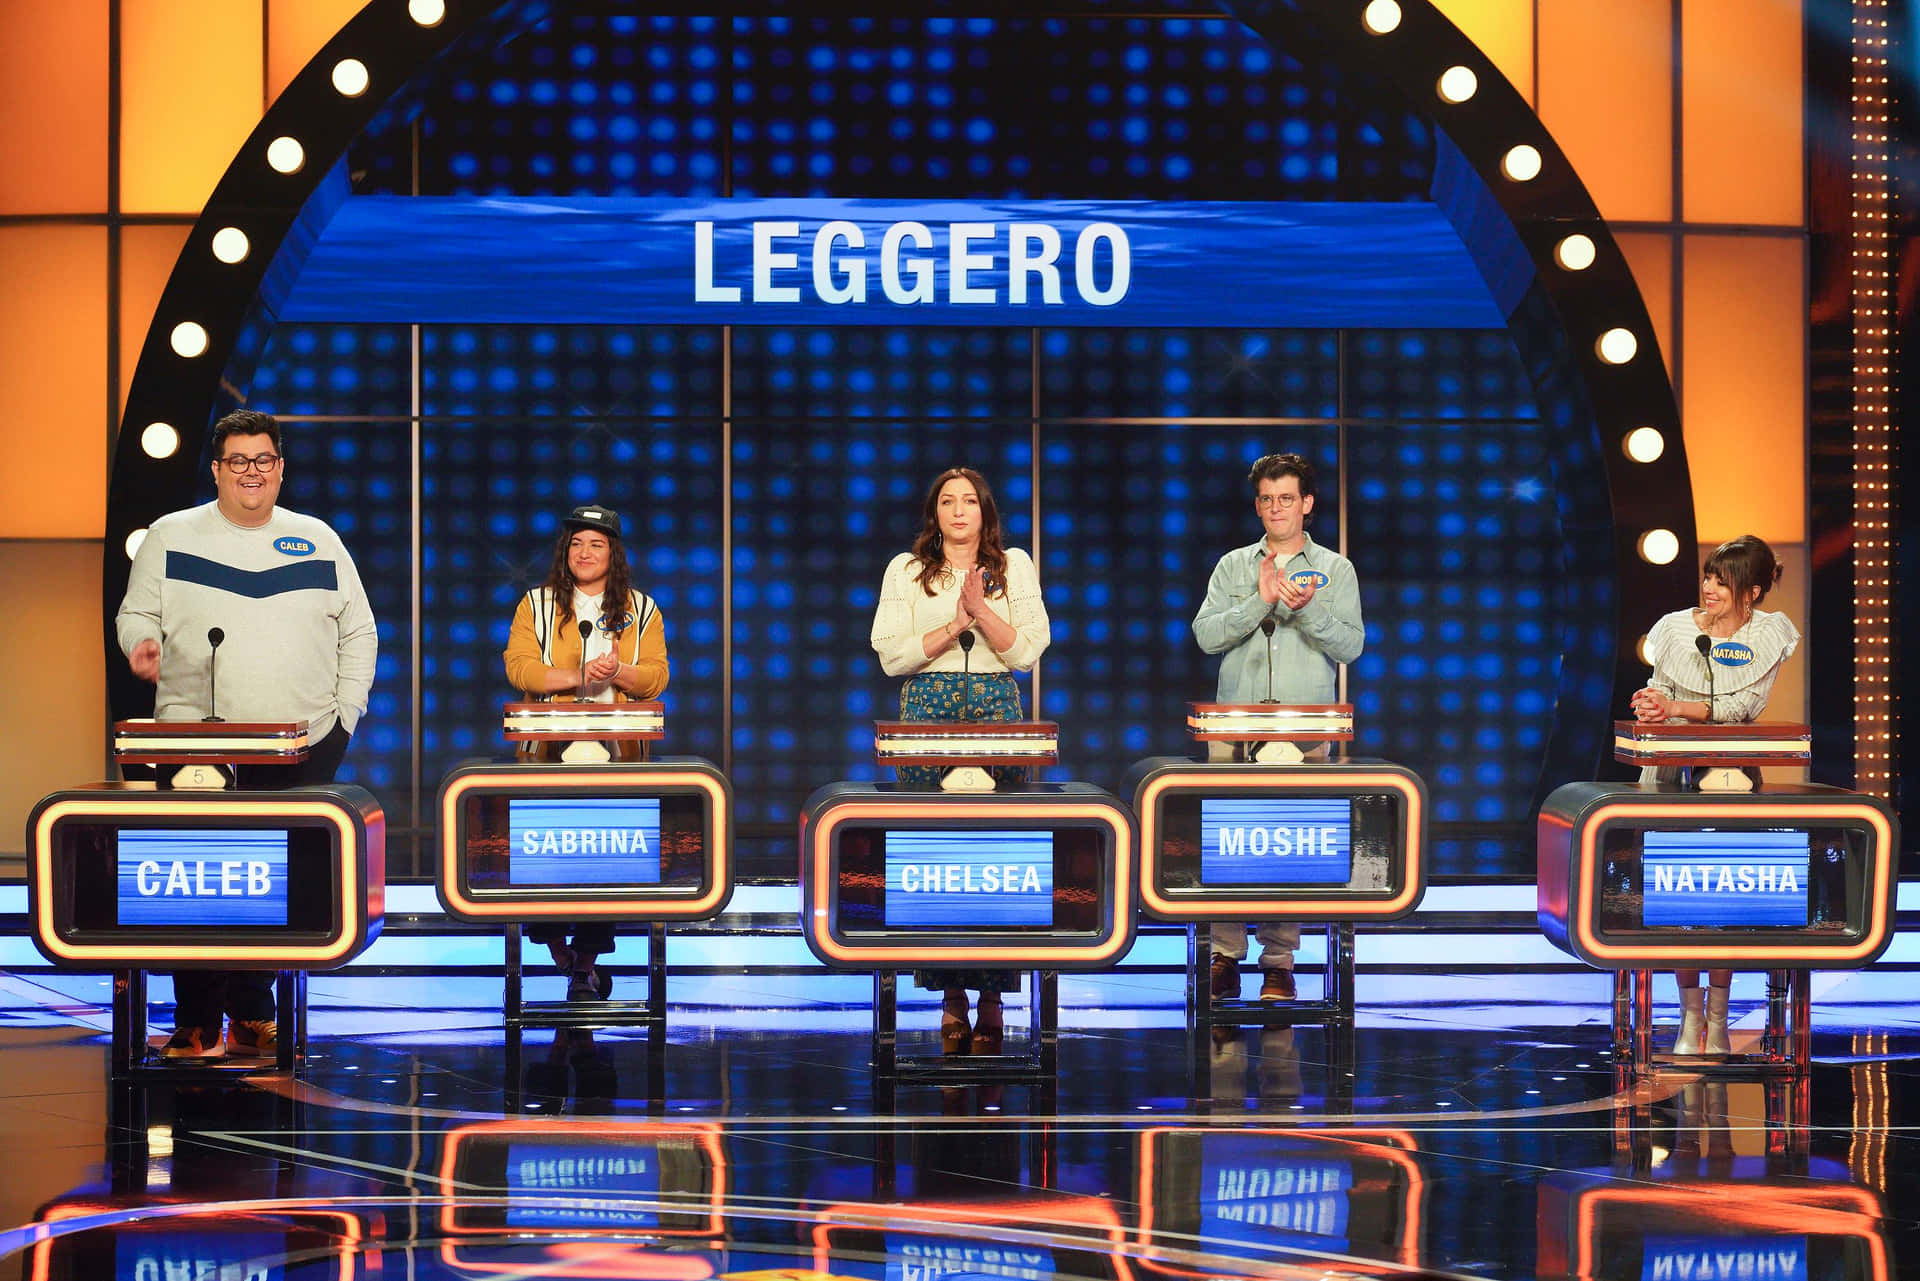 A Group Of People Standing On Stage With The Word Leggero